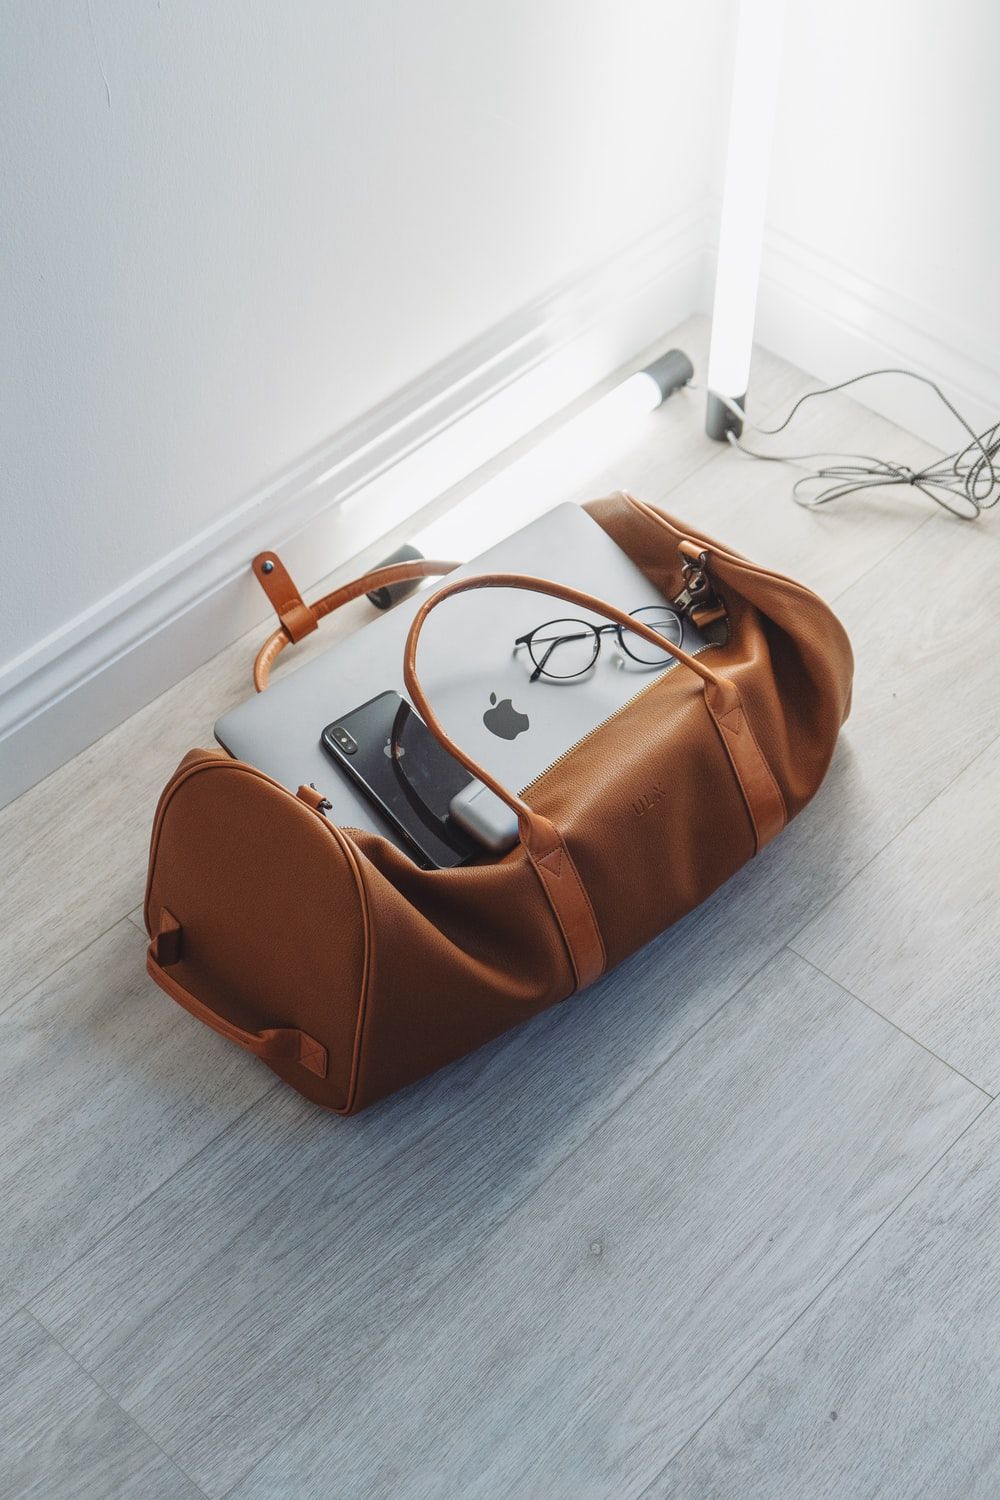 Luggage Picture. Download Free Image